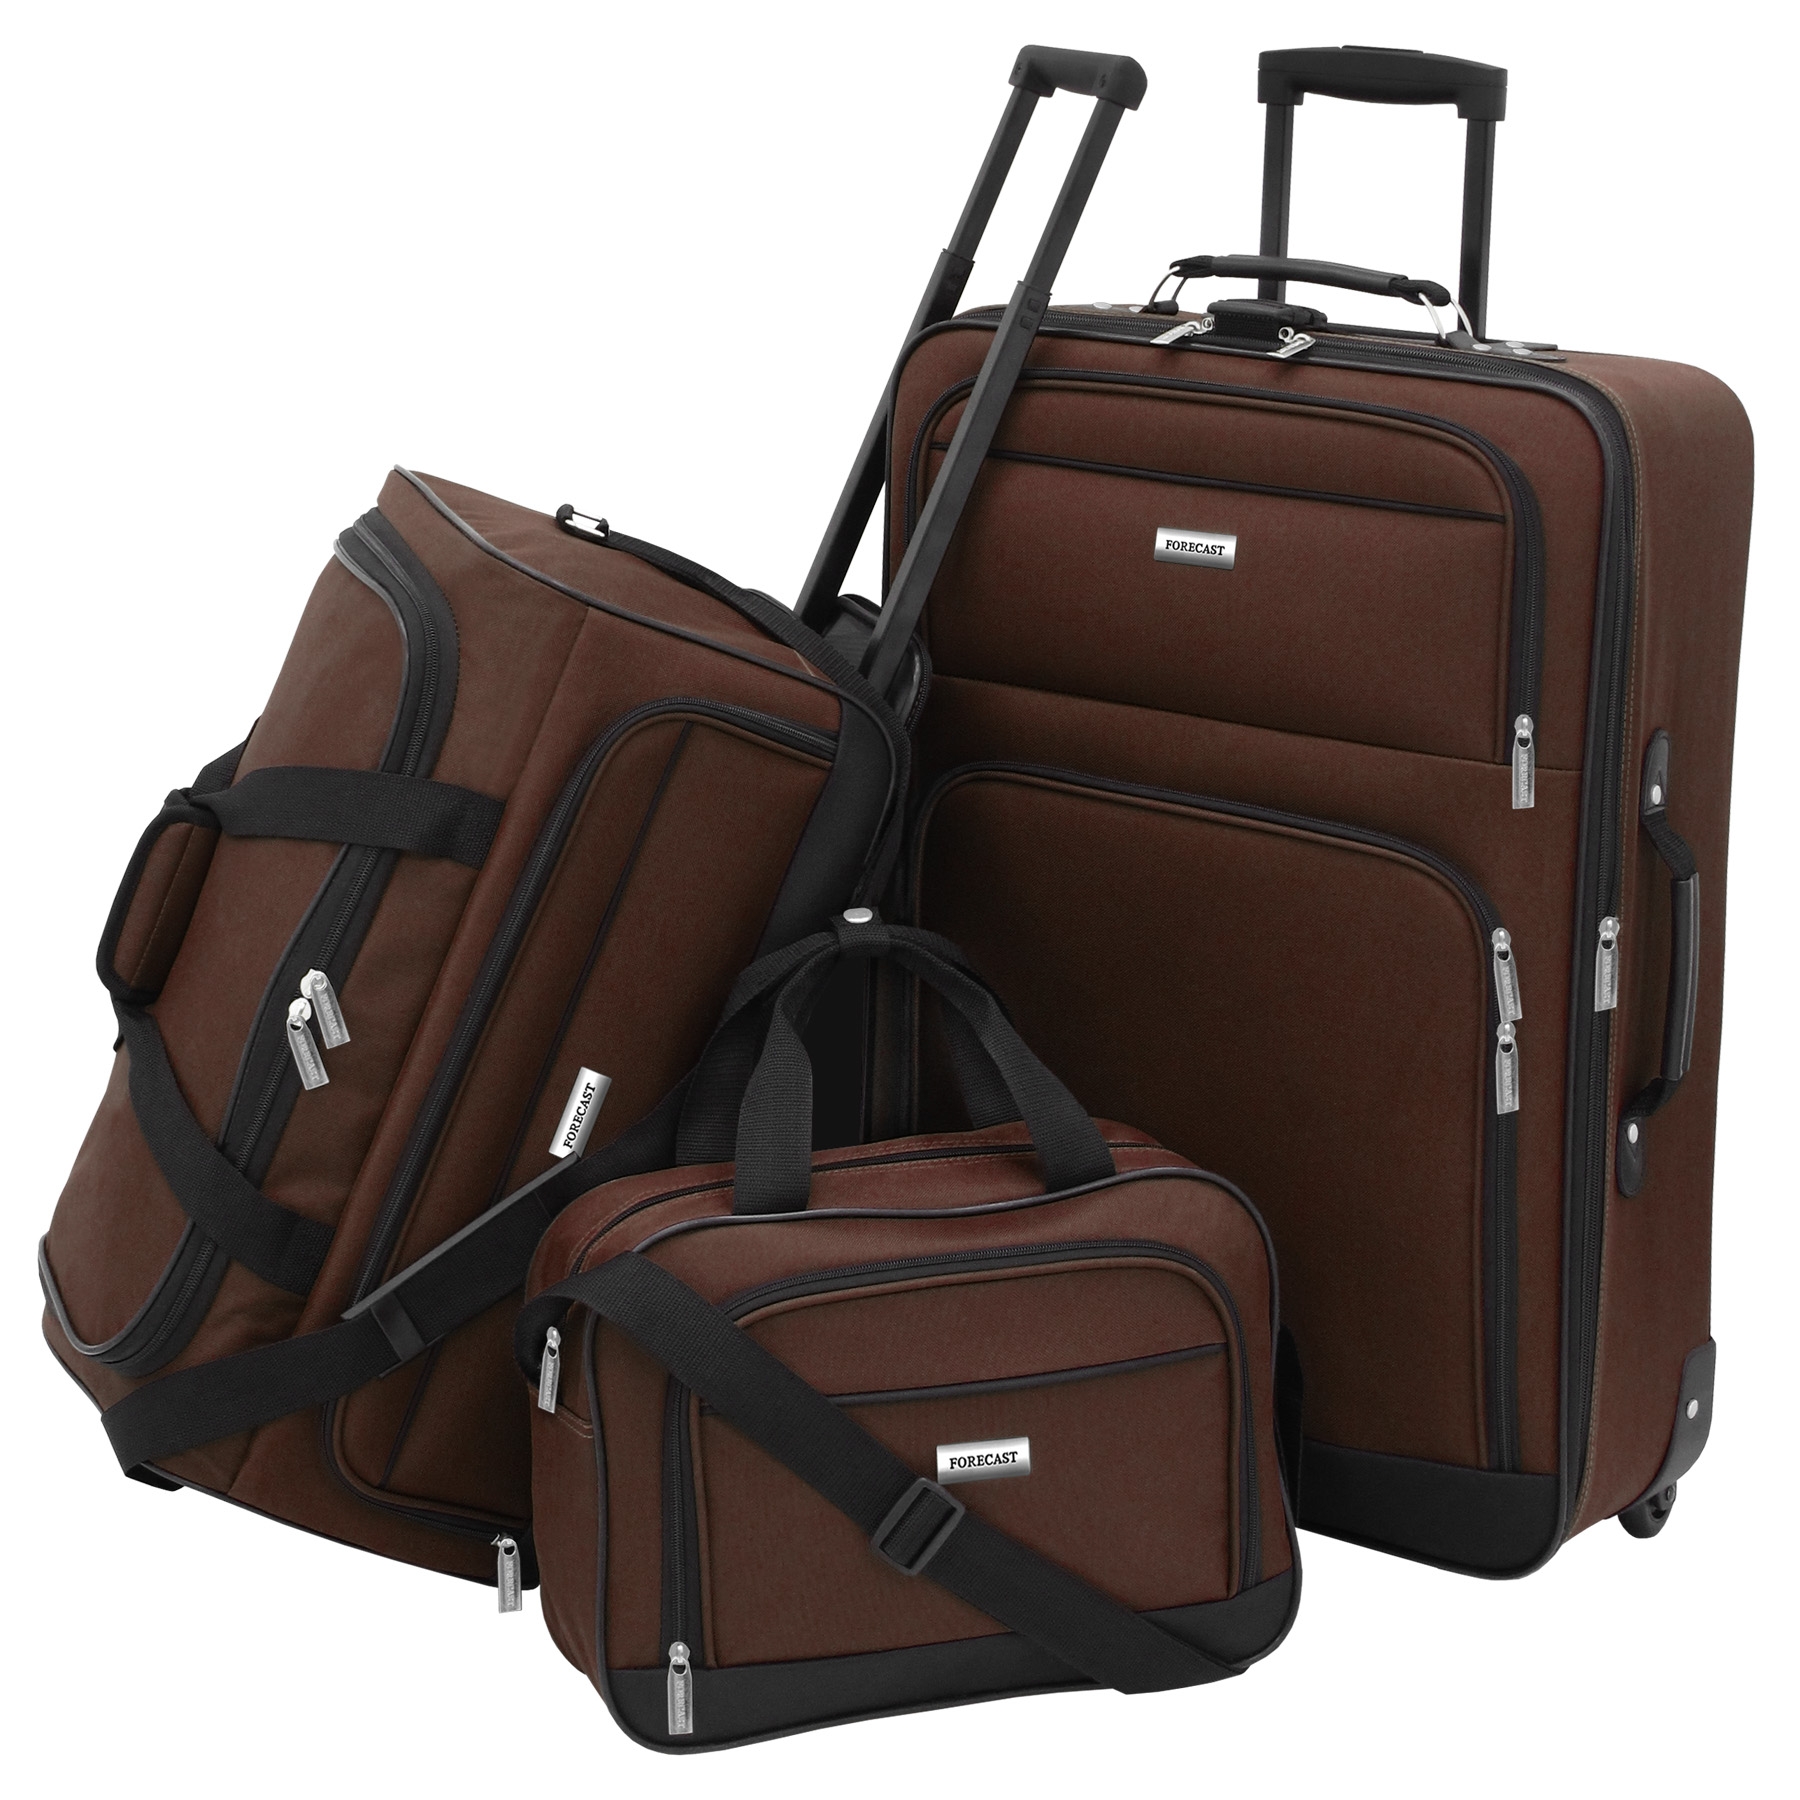 Forecast Catalina 3 Piece Luggage Set - Brown